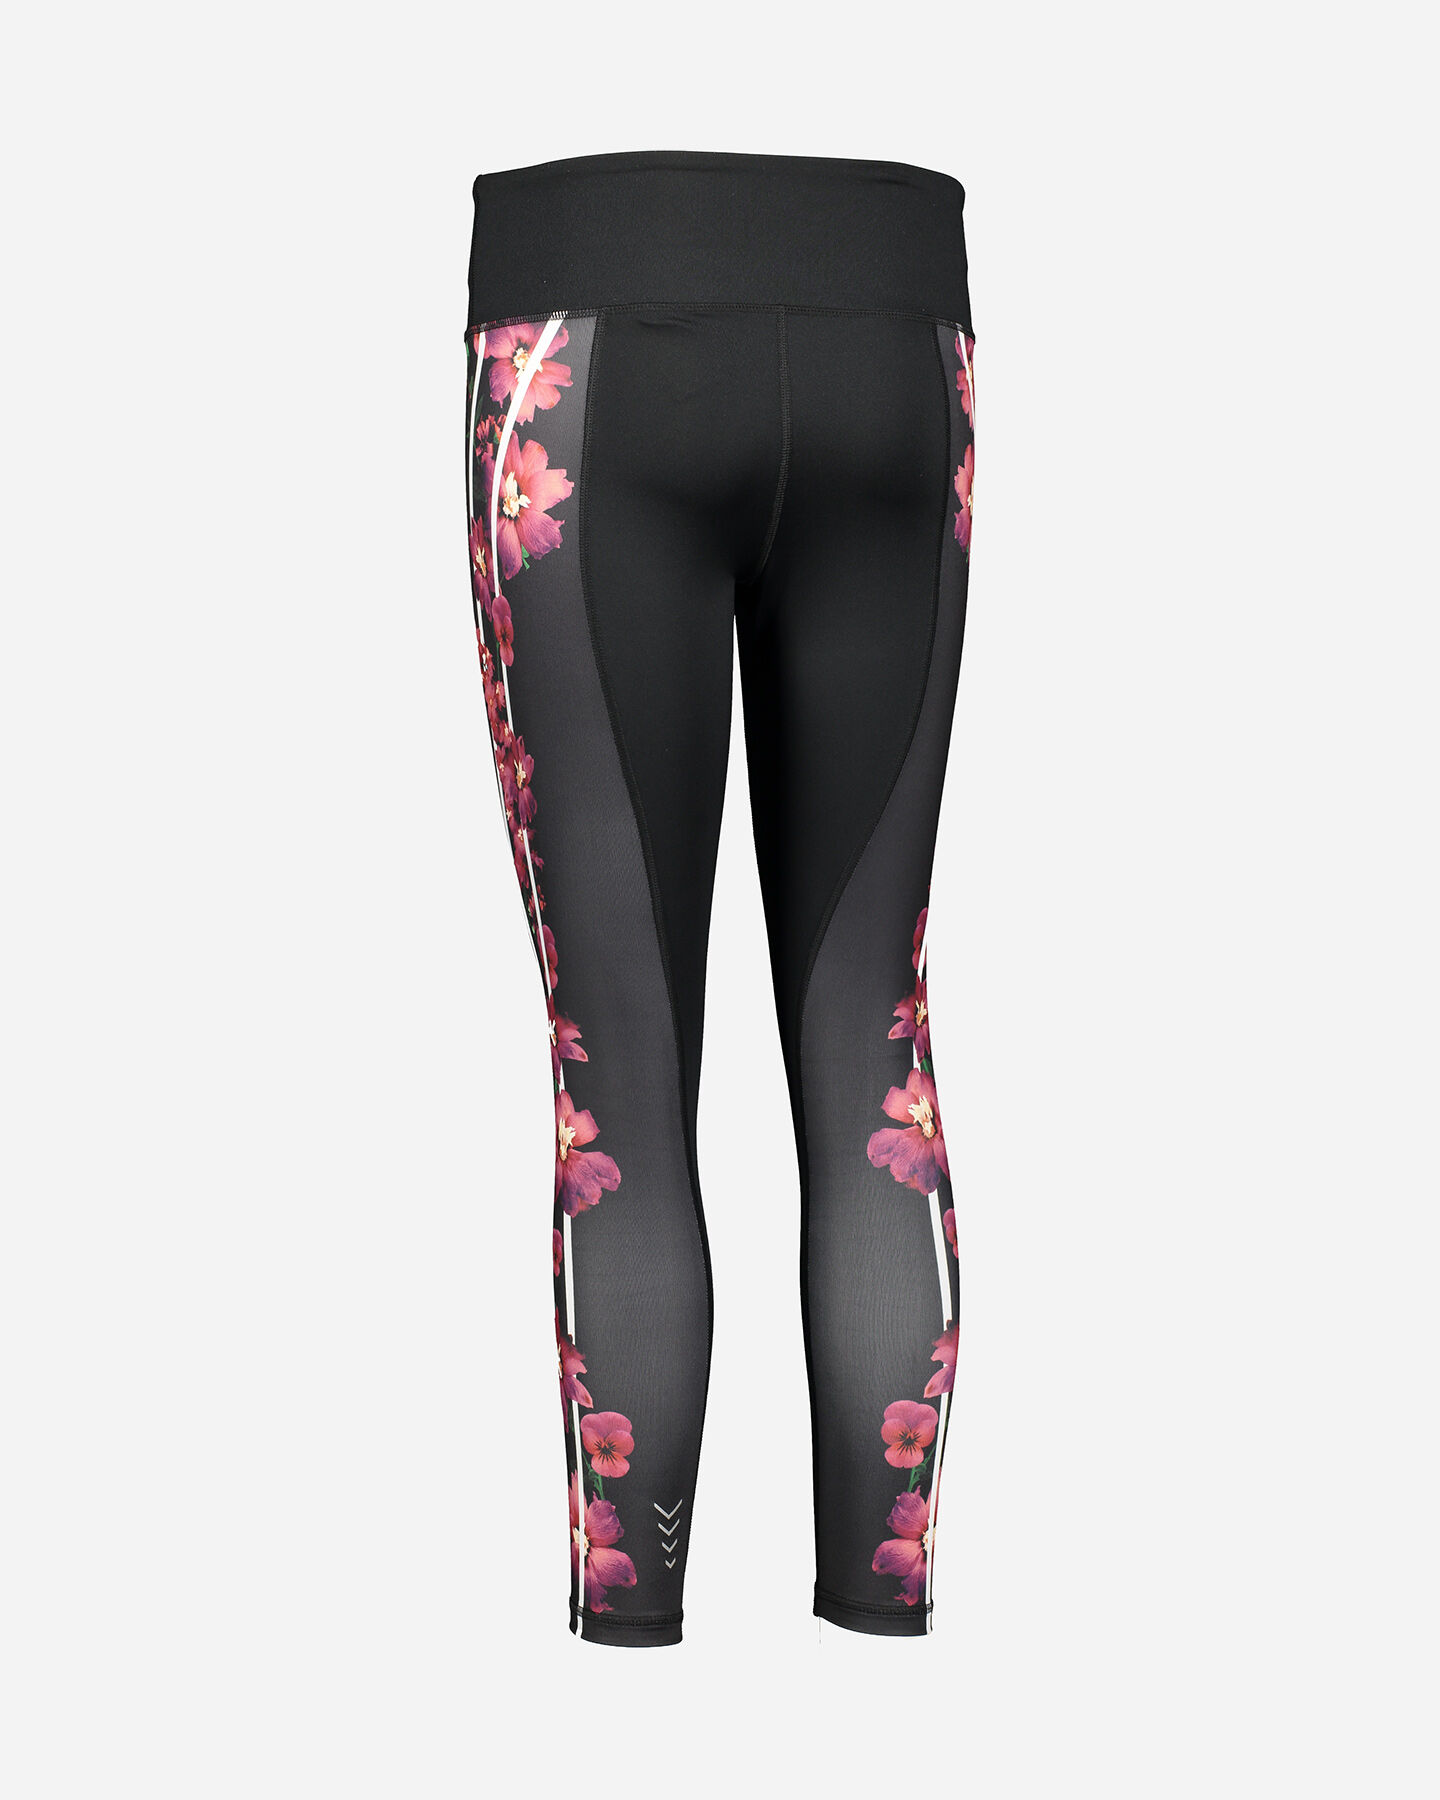  Leggings FREDDY FLOWERS BAND ACTIVE W S5298067|N-|XS scatto 2